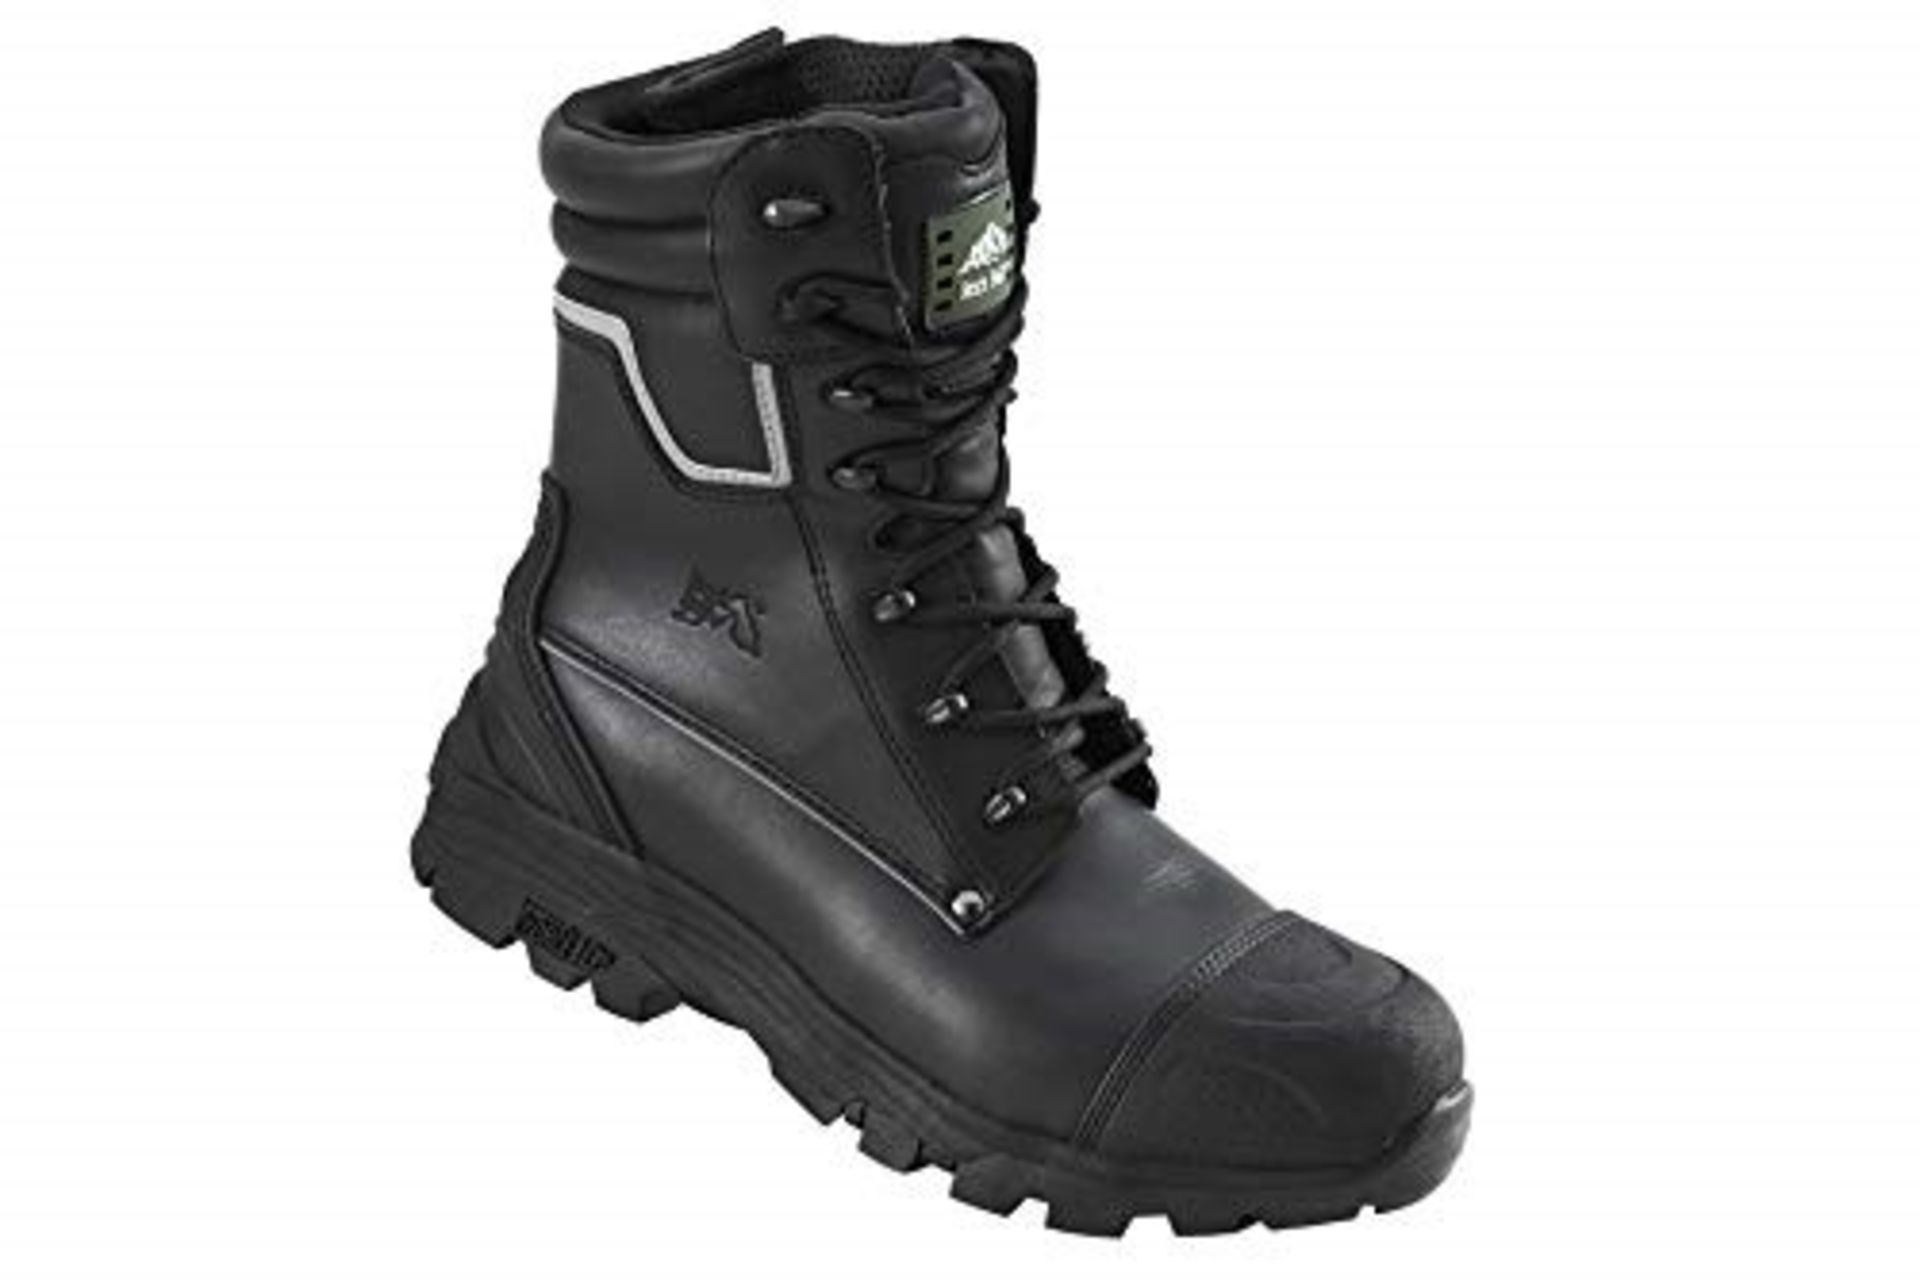 1 AS NEW BOXED ROCK FALL TUNGSTEN SAFETY BOOTS IN BLACK - RF15 / SIZE - 13 / PN - 549 / RRP £60.